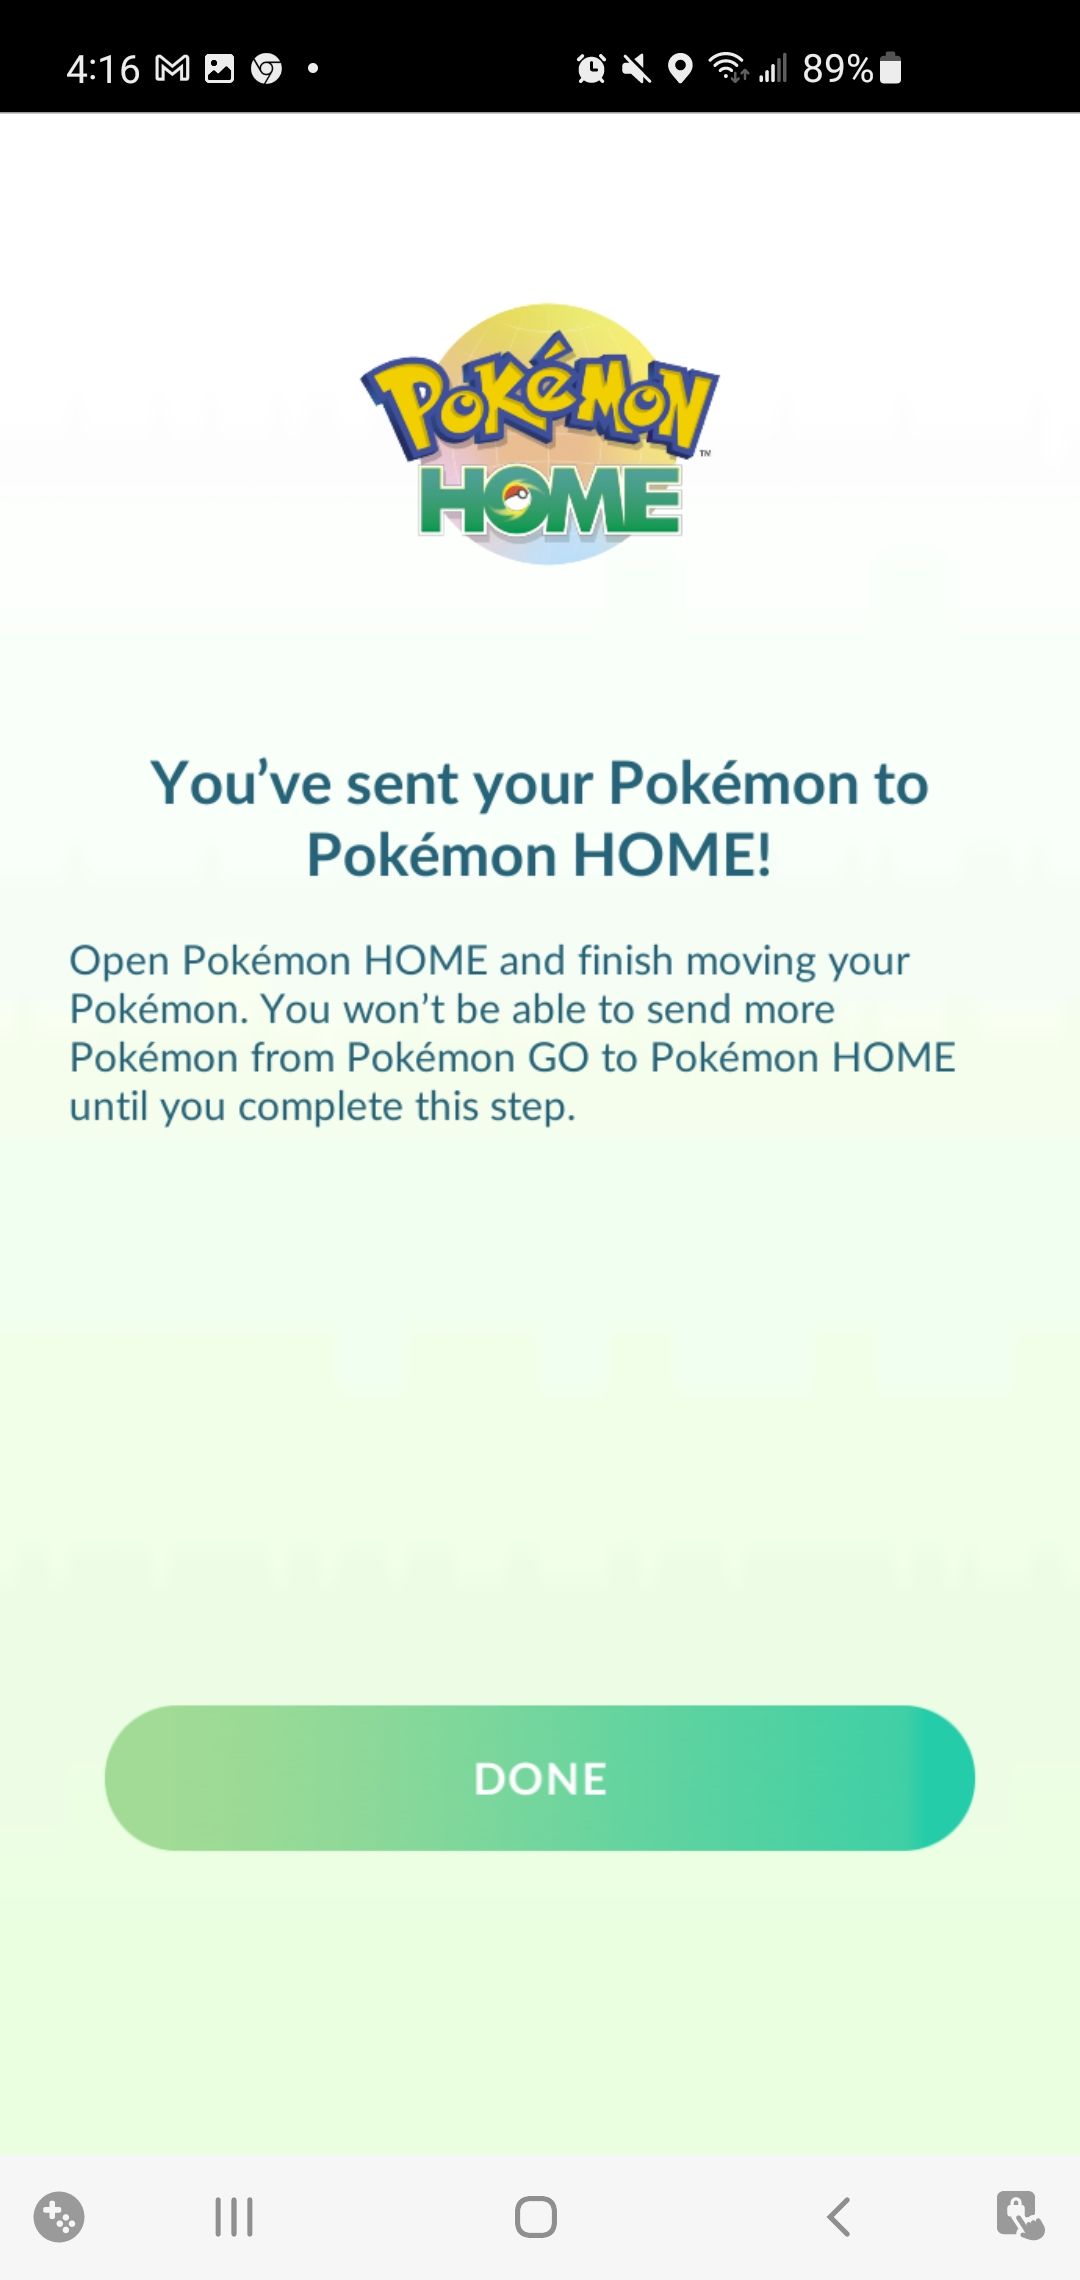 Screenshot of showing the last transfer step before completion in Pokemon Go